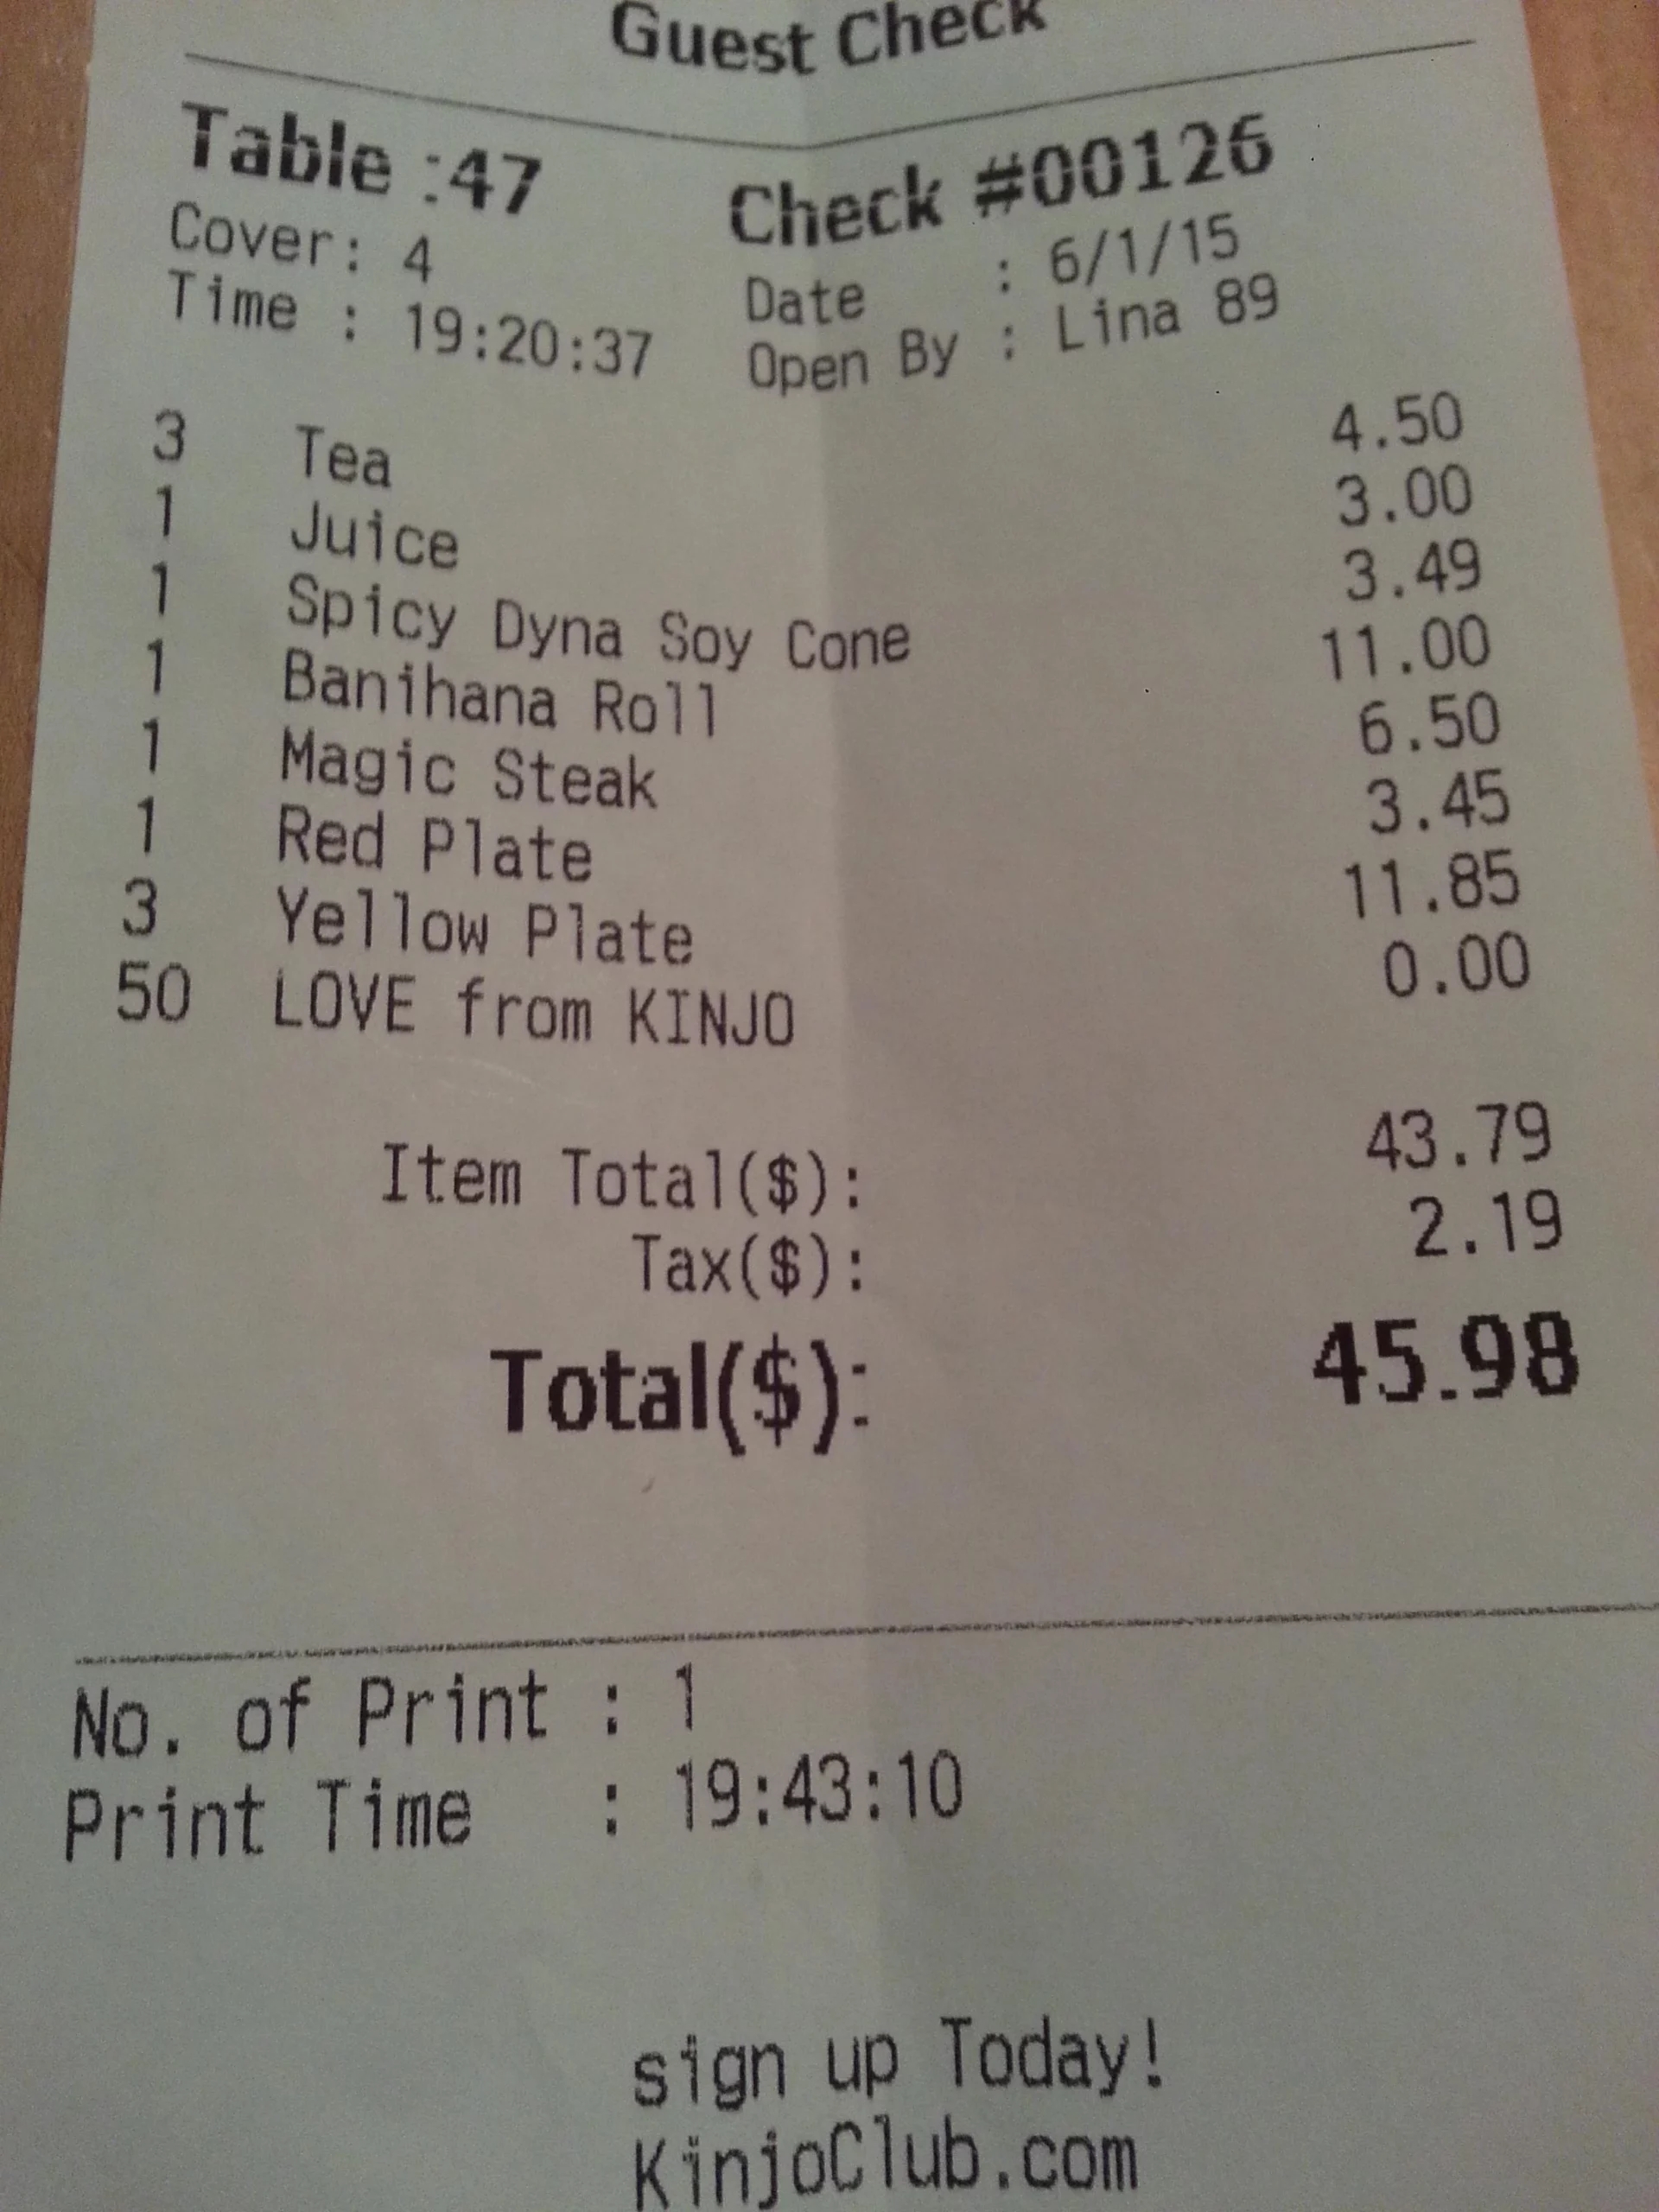 receipt that has an item that says "Love from KINJO $0"